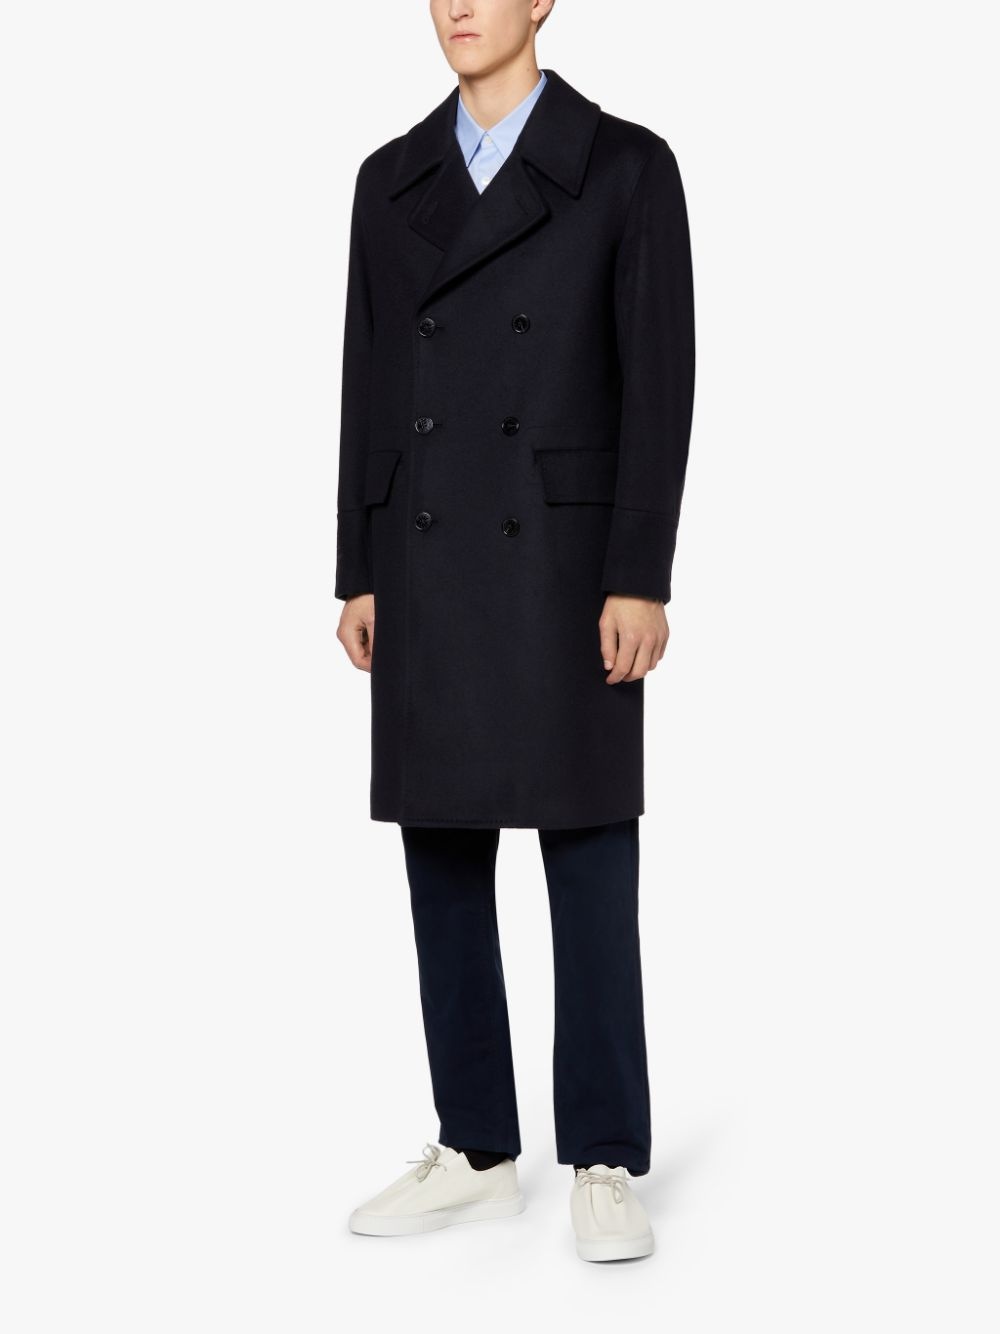 REDFORD NAVY WOOL & CASHMERE DOUBLE BREASTED COAT | GM-1101 - 4